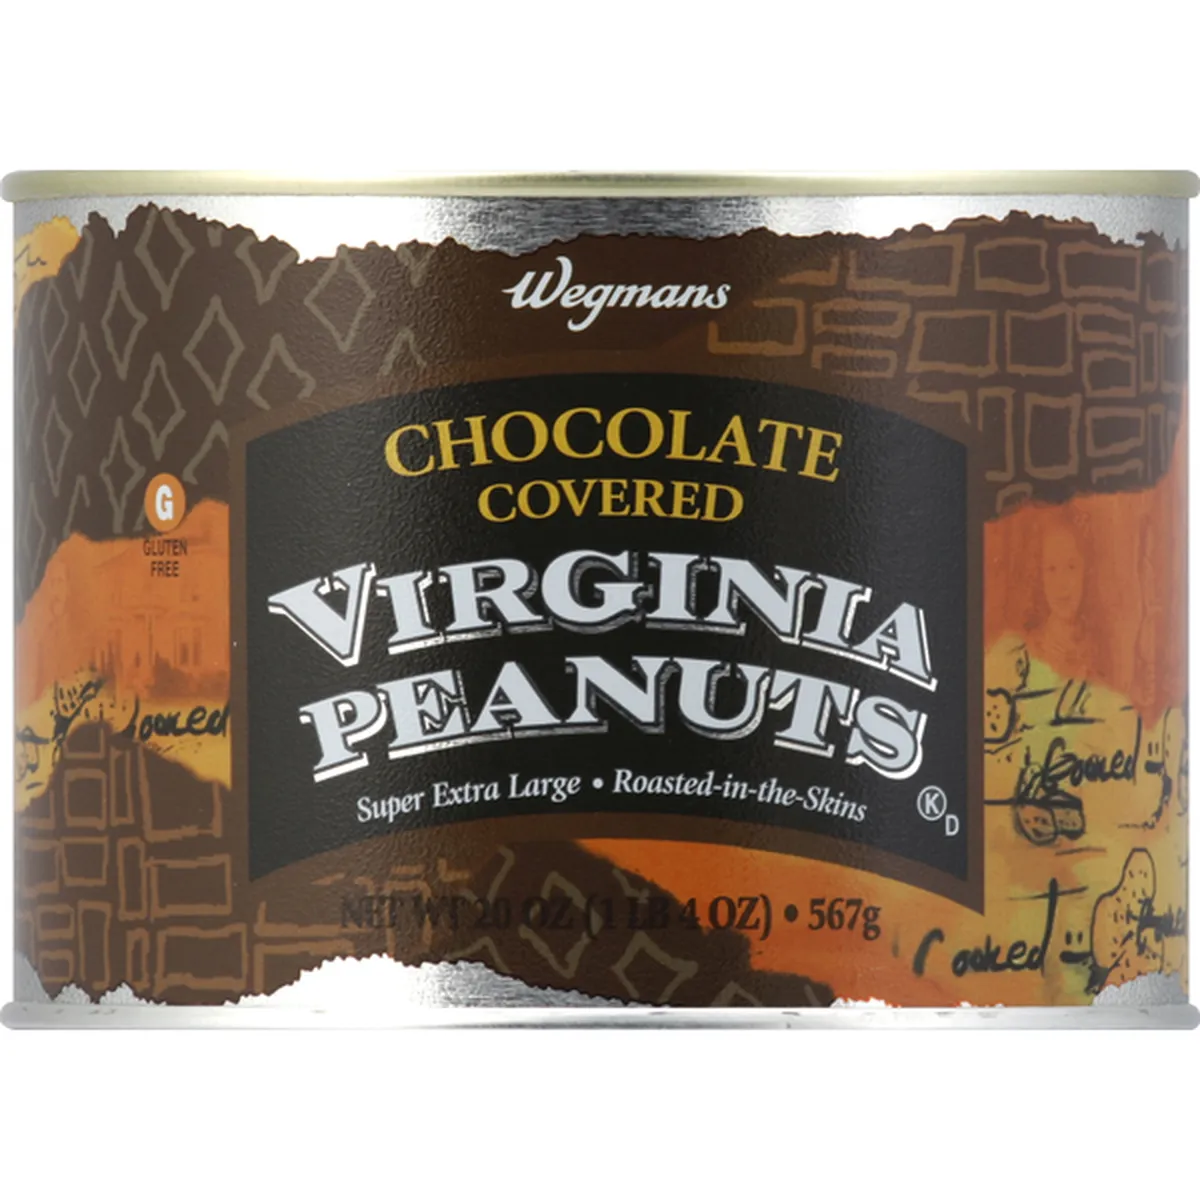 The Peanut Shop of Williamsburg - Honey Roasted Peanuts - 20 oz. Tin -  Price Includes Shipping - The Virginia Marketplace